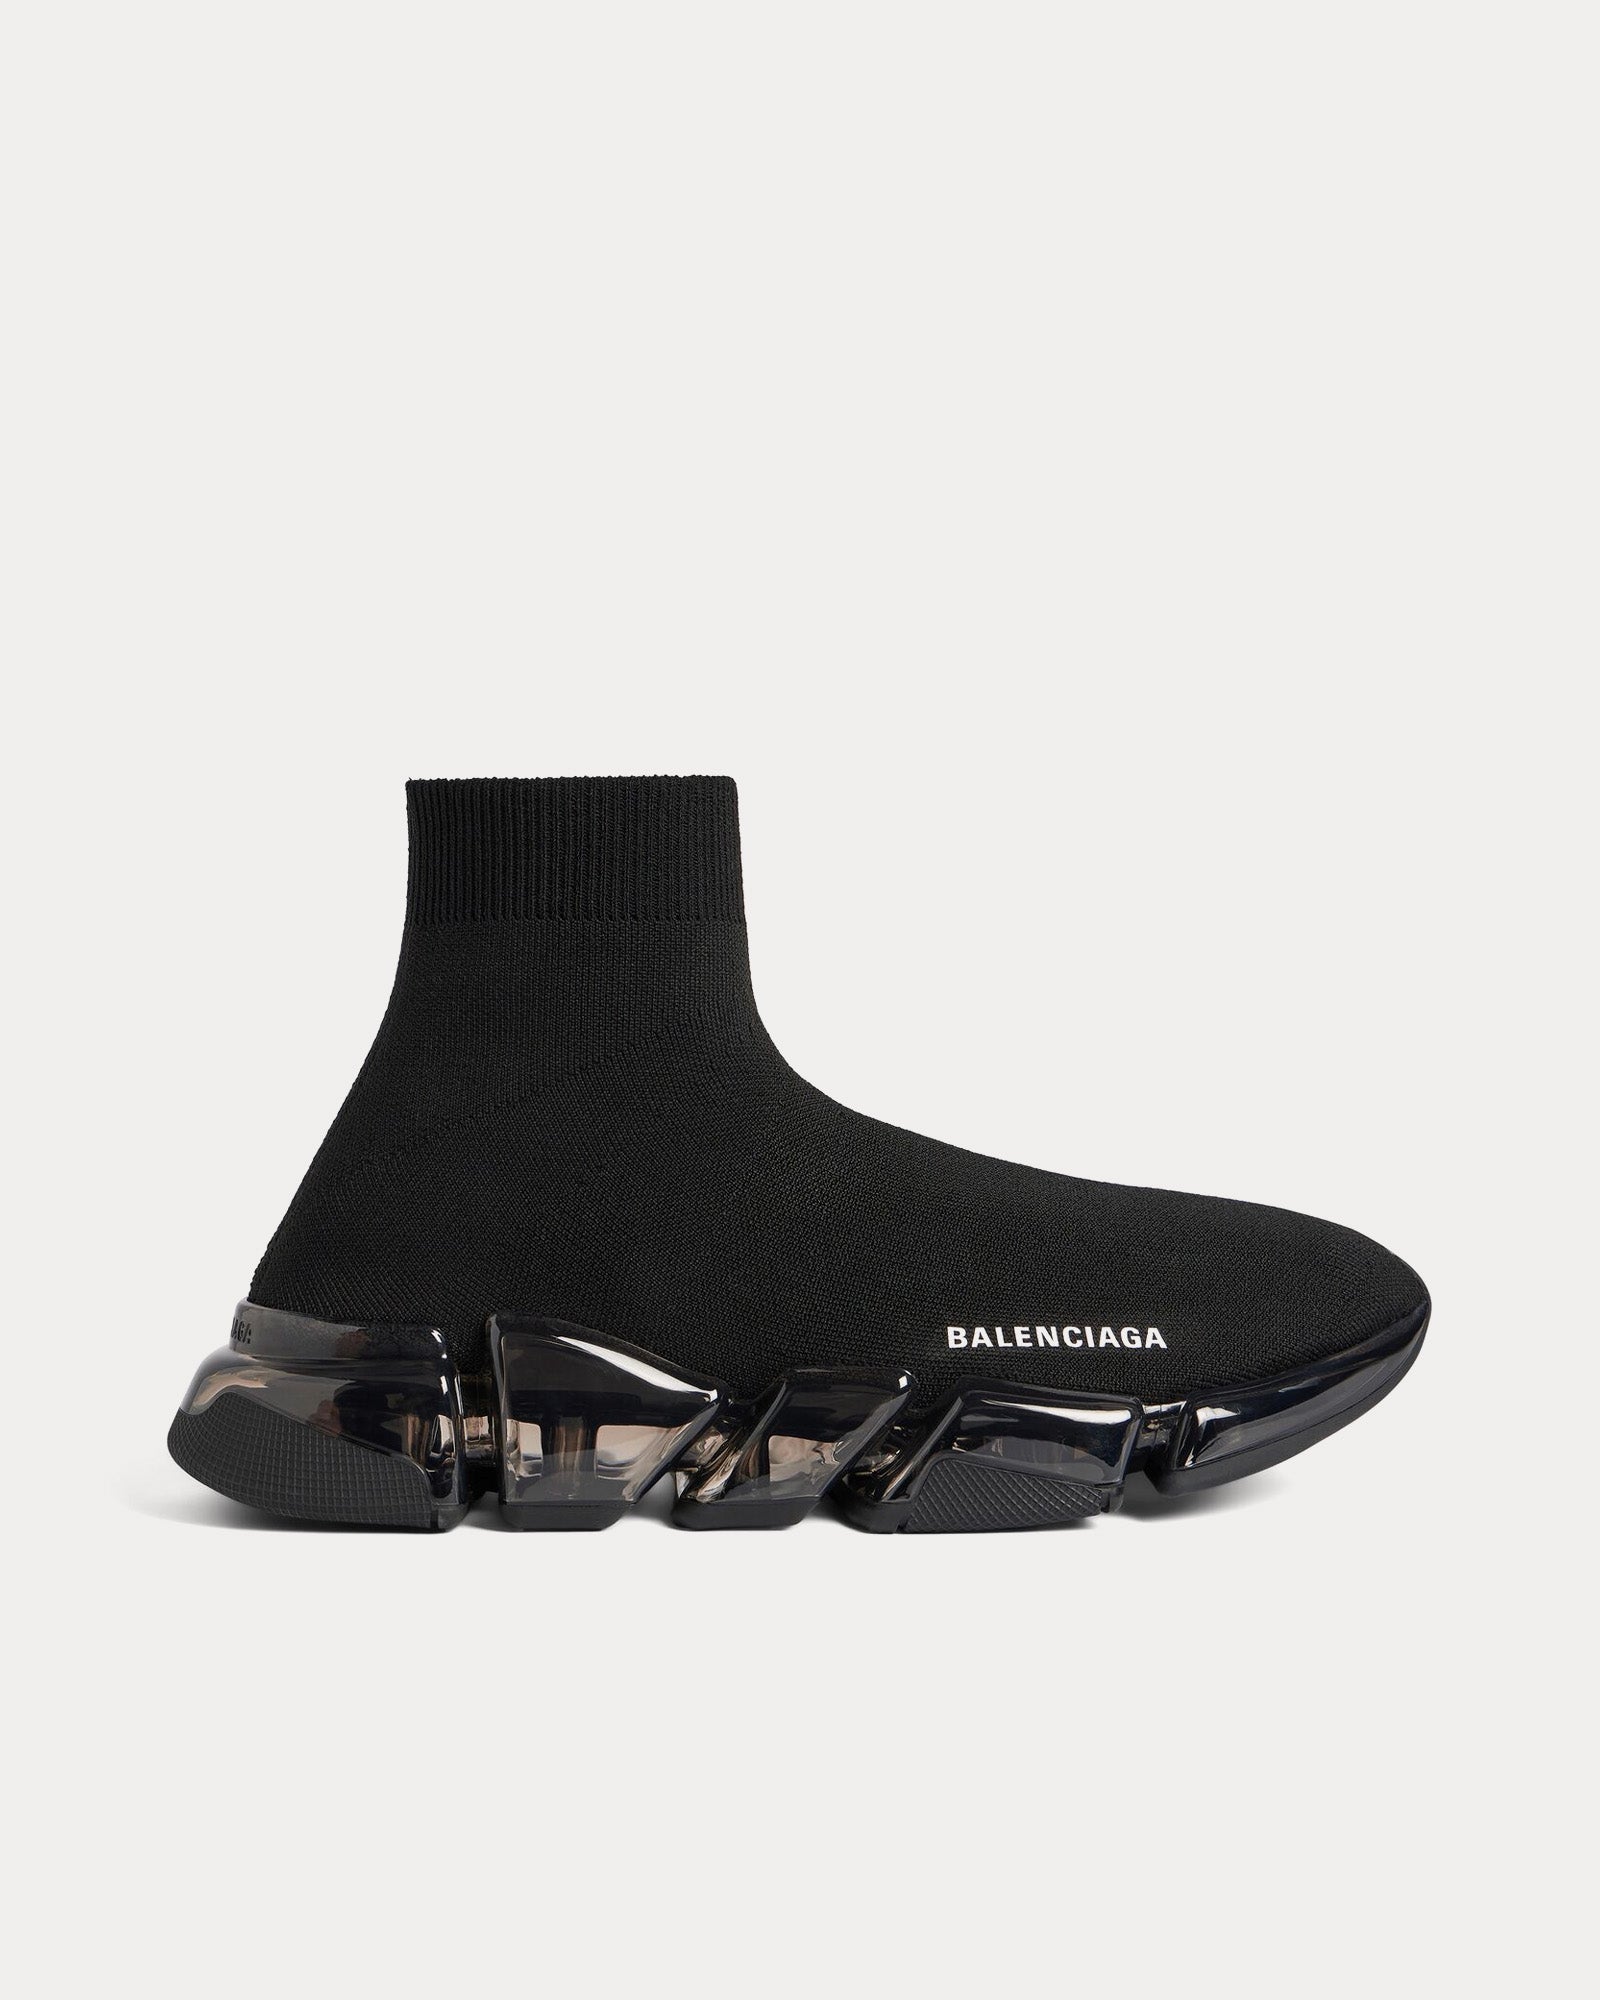 Balenciaga - Speed 2.0 Full Clear Sole Recycled Knit Black High Top Sneakers